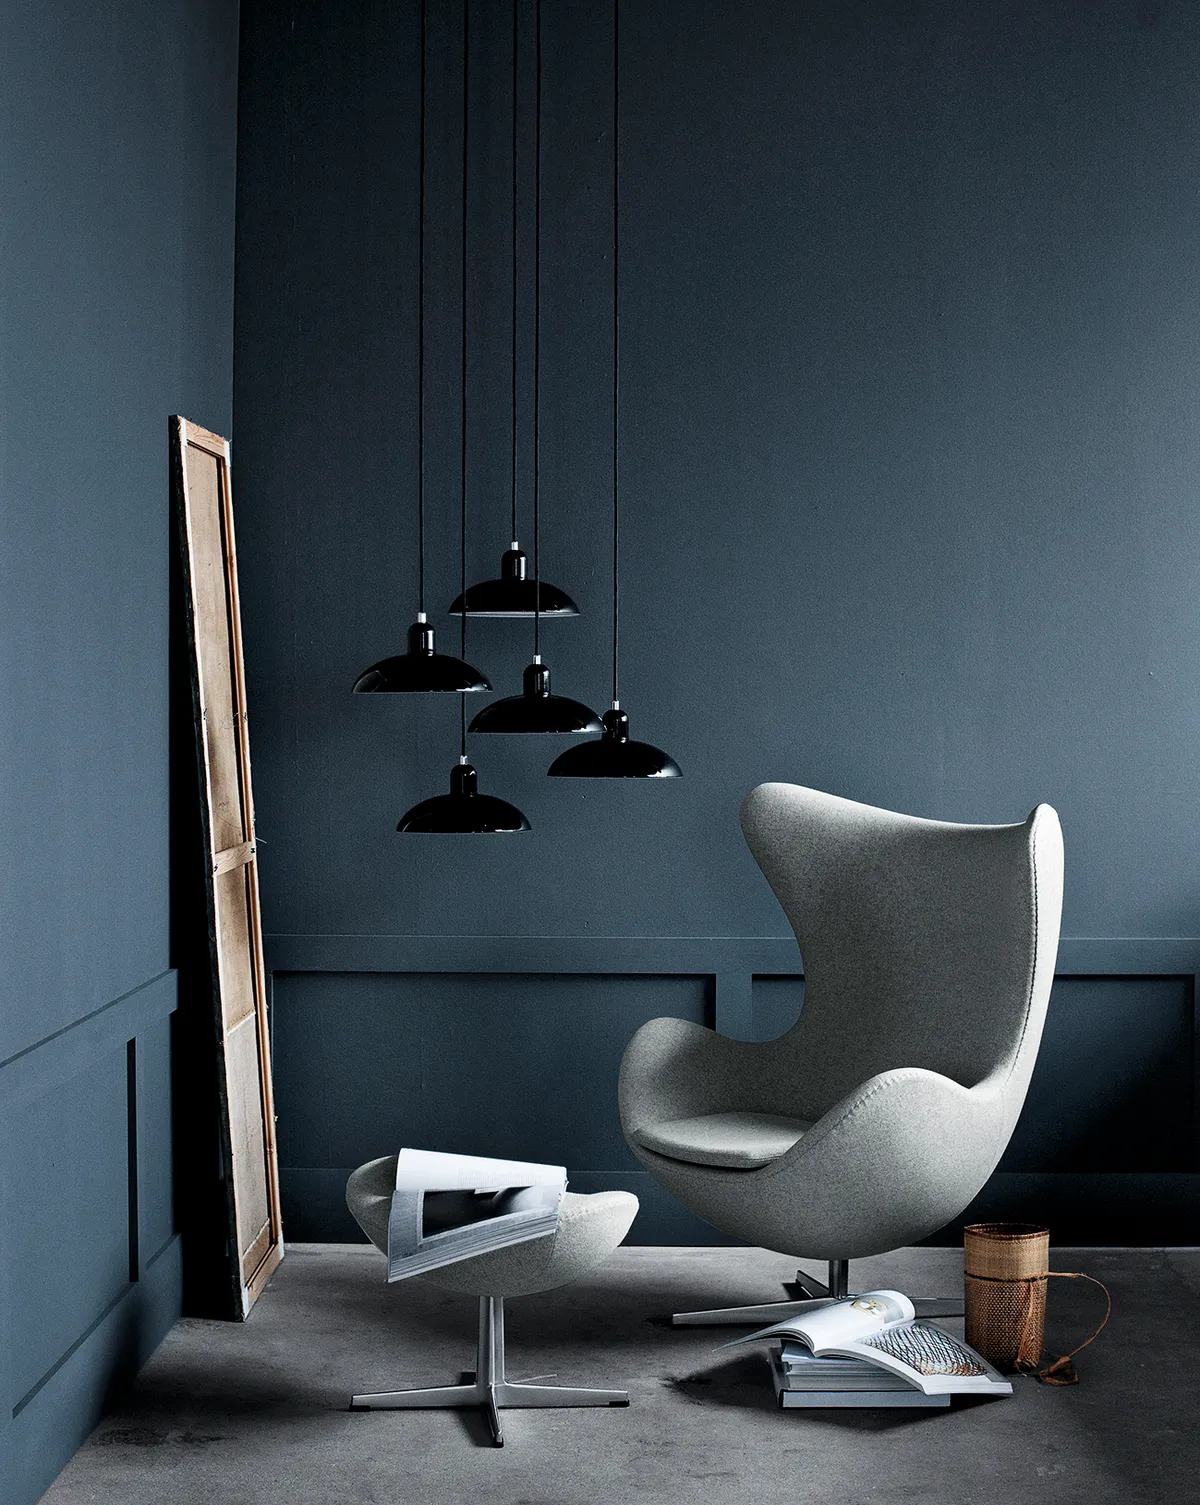 An Egg Chair upholstered in grey fabric against a dark blue wall